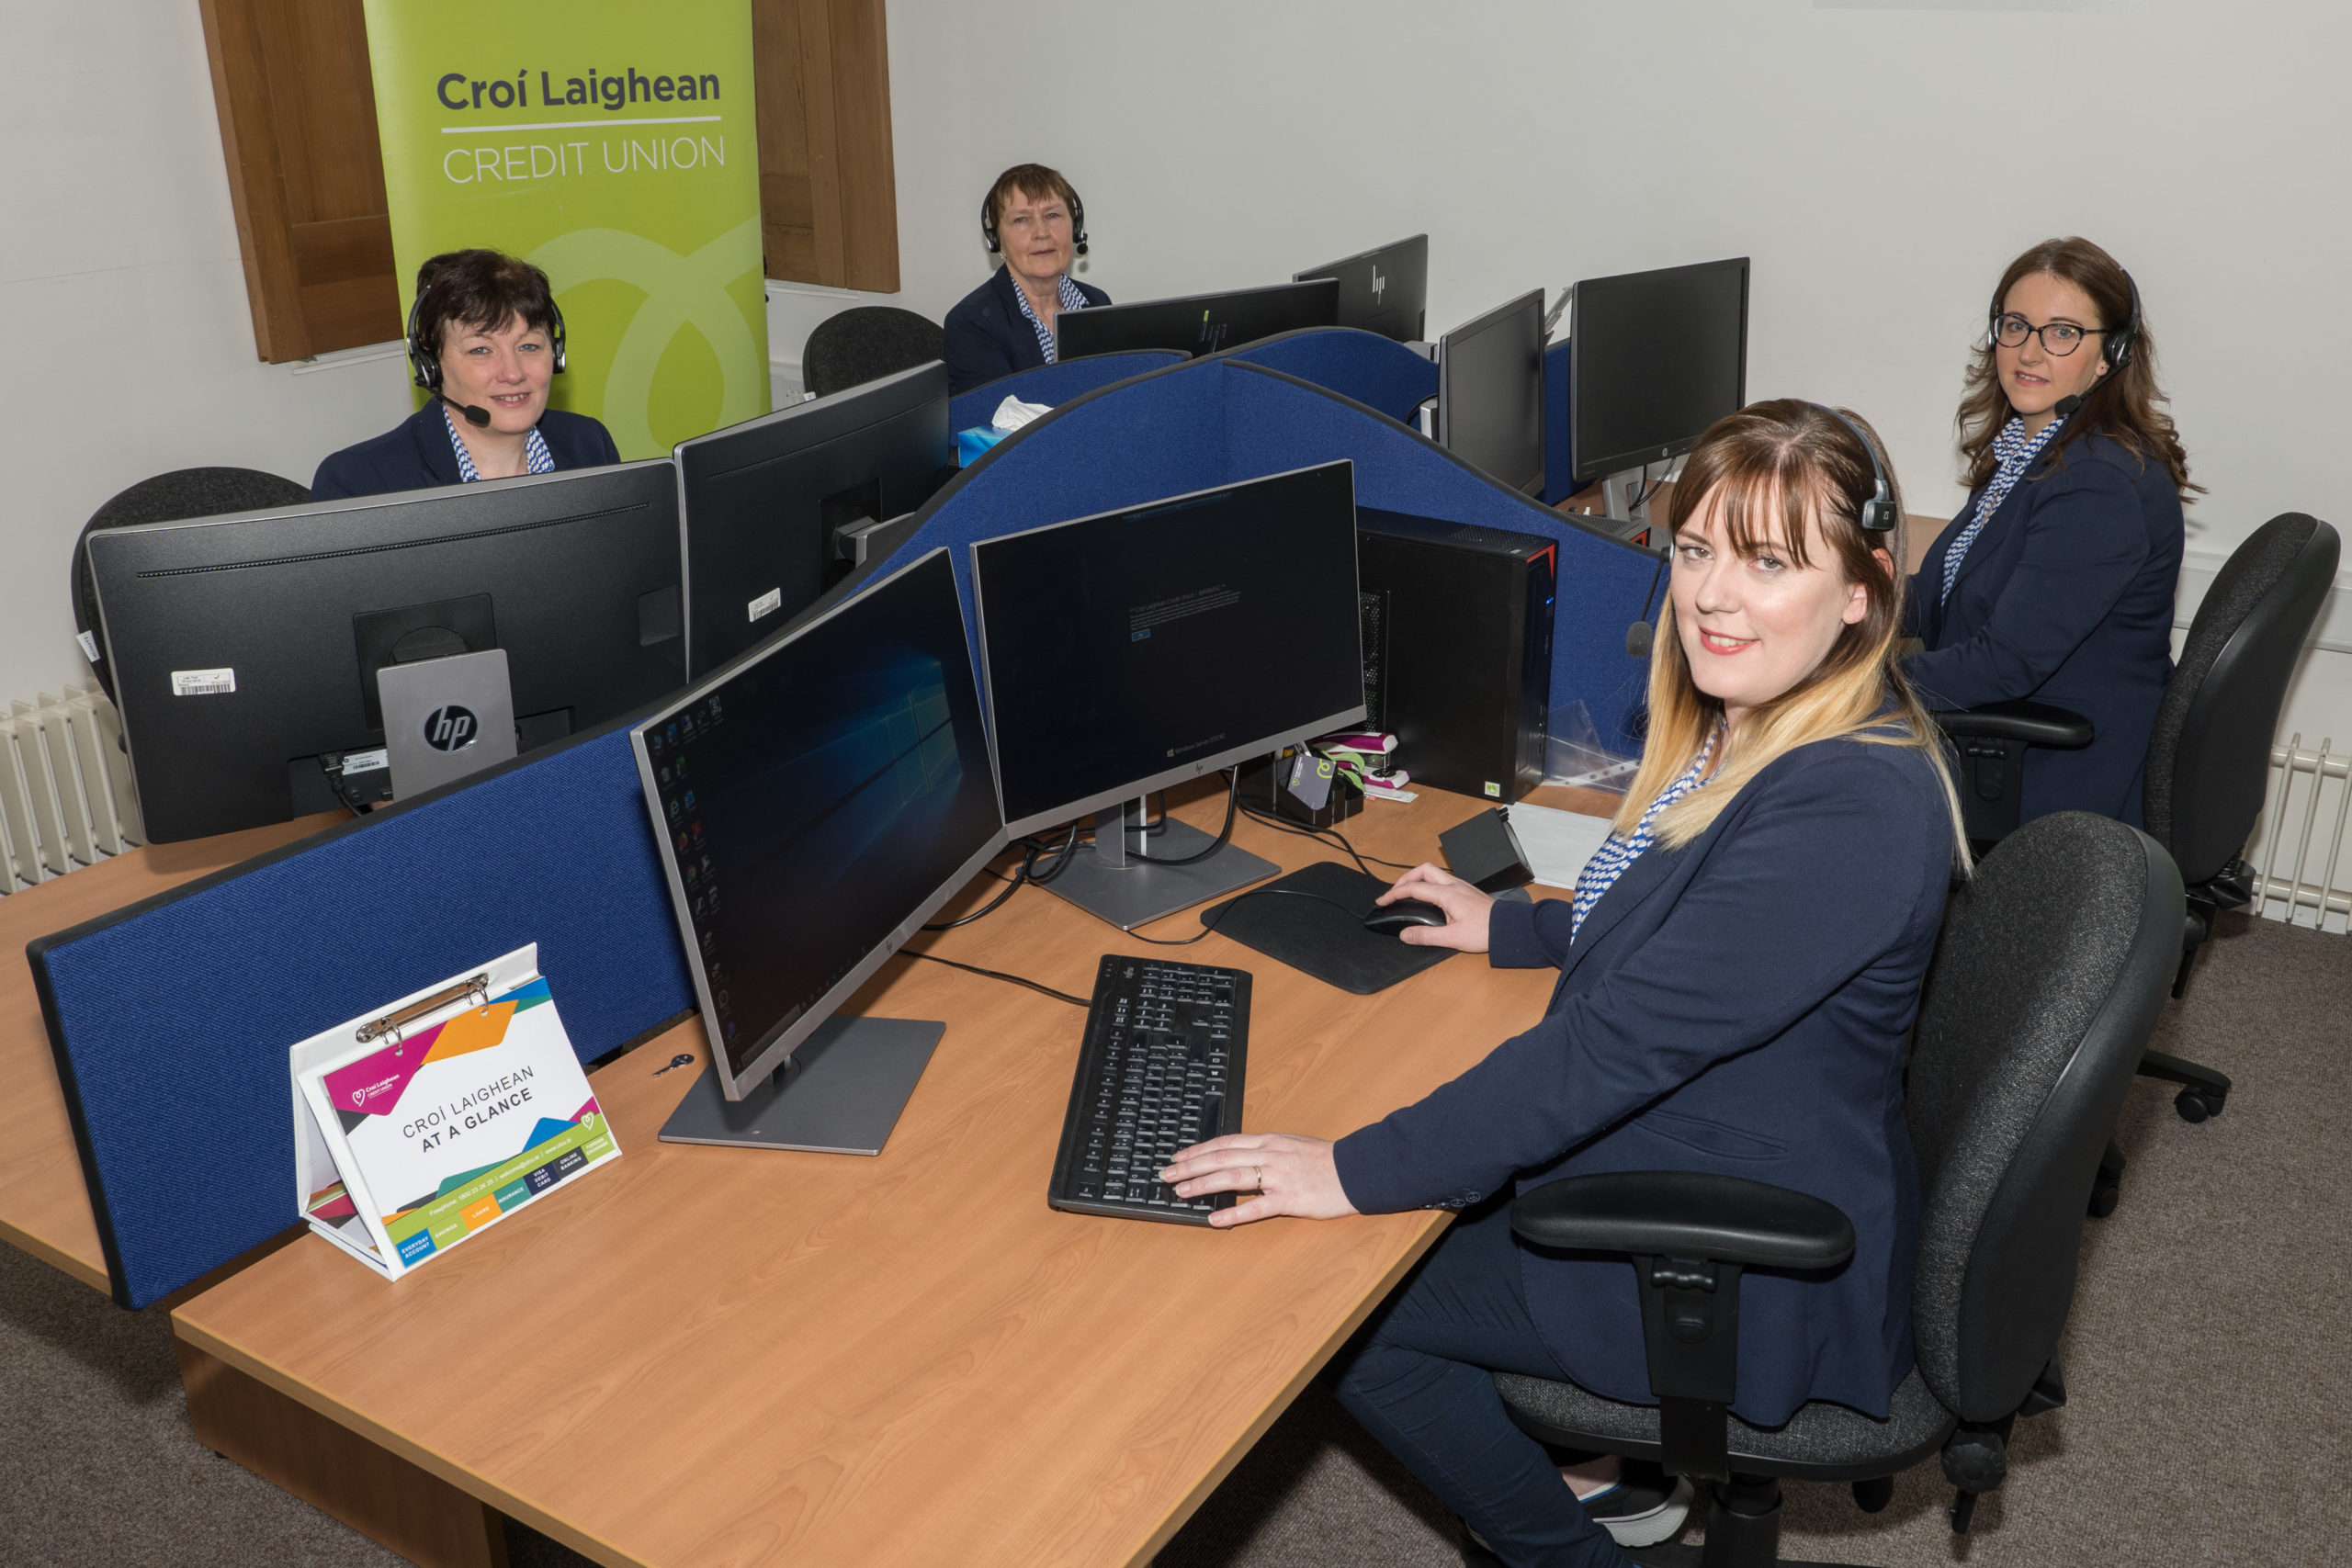 New Members Services Centre launched, with dedicated staff available to answer member’s queries